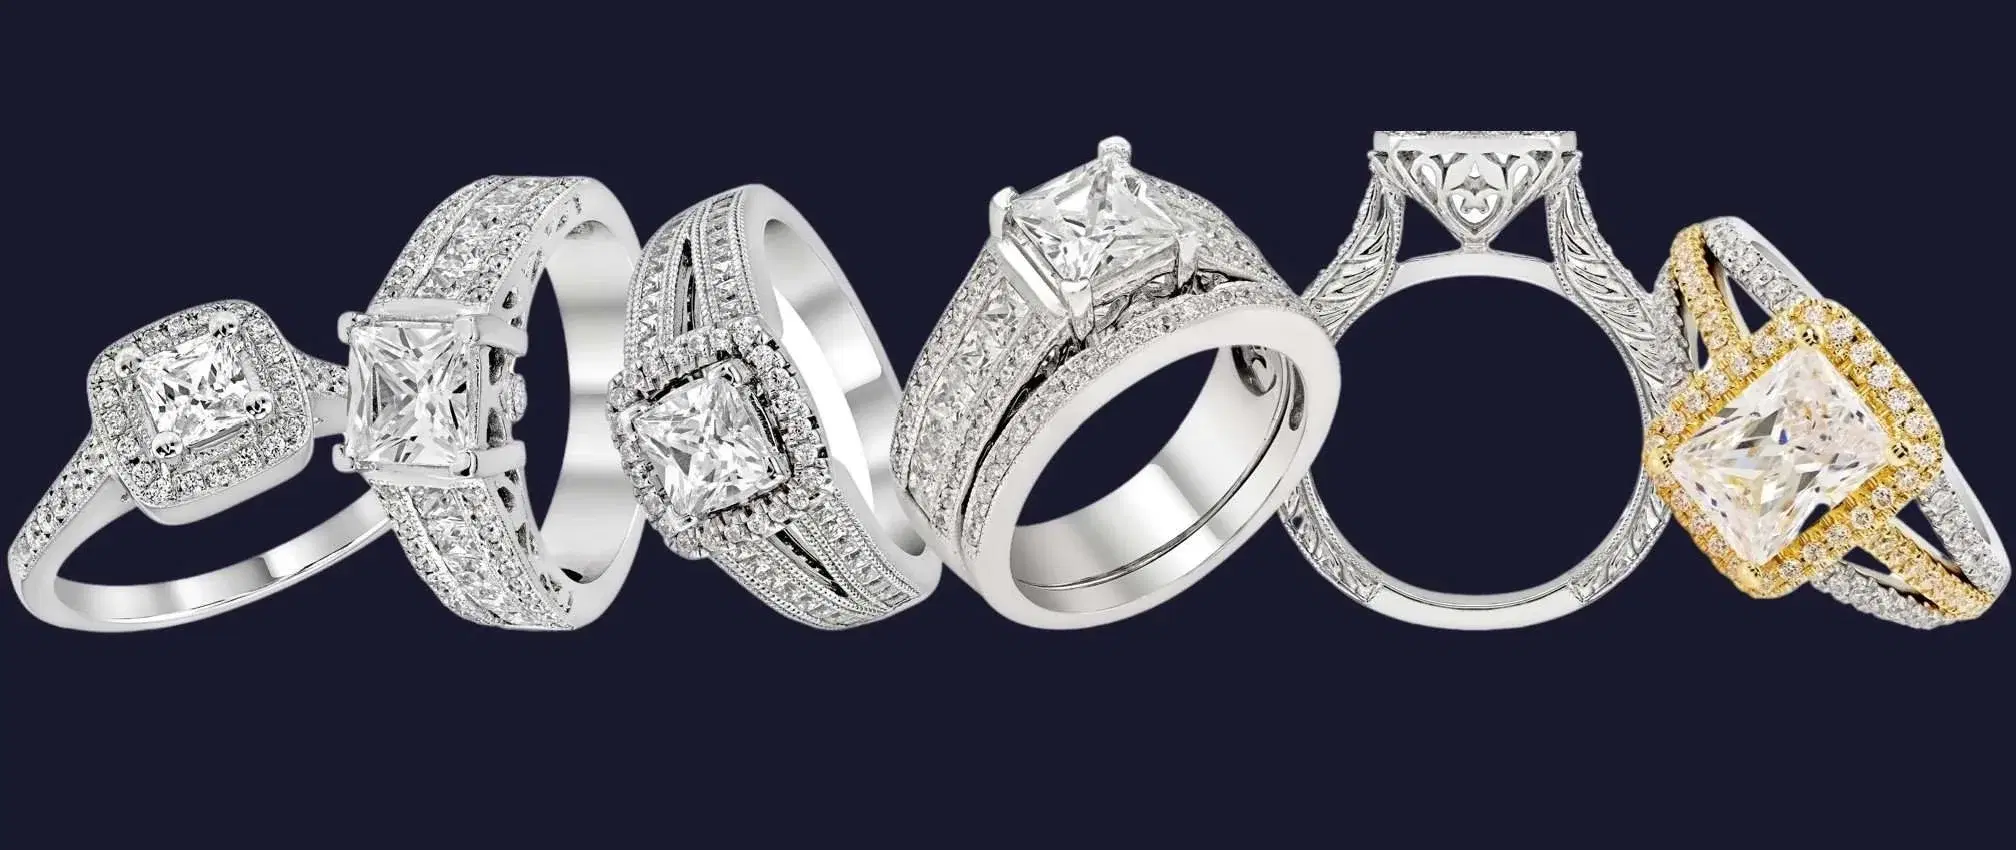 White Gold Engagement Rings: 15 Unique Designs for the Special Day